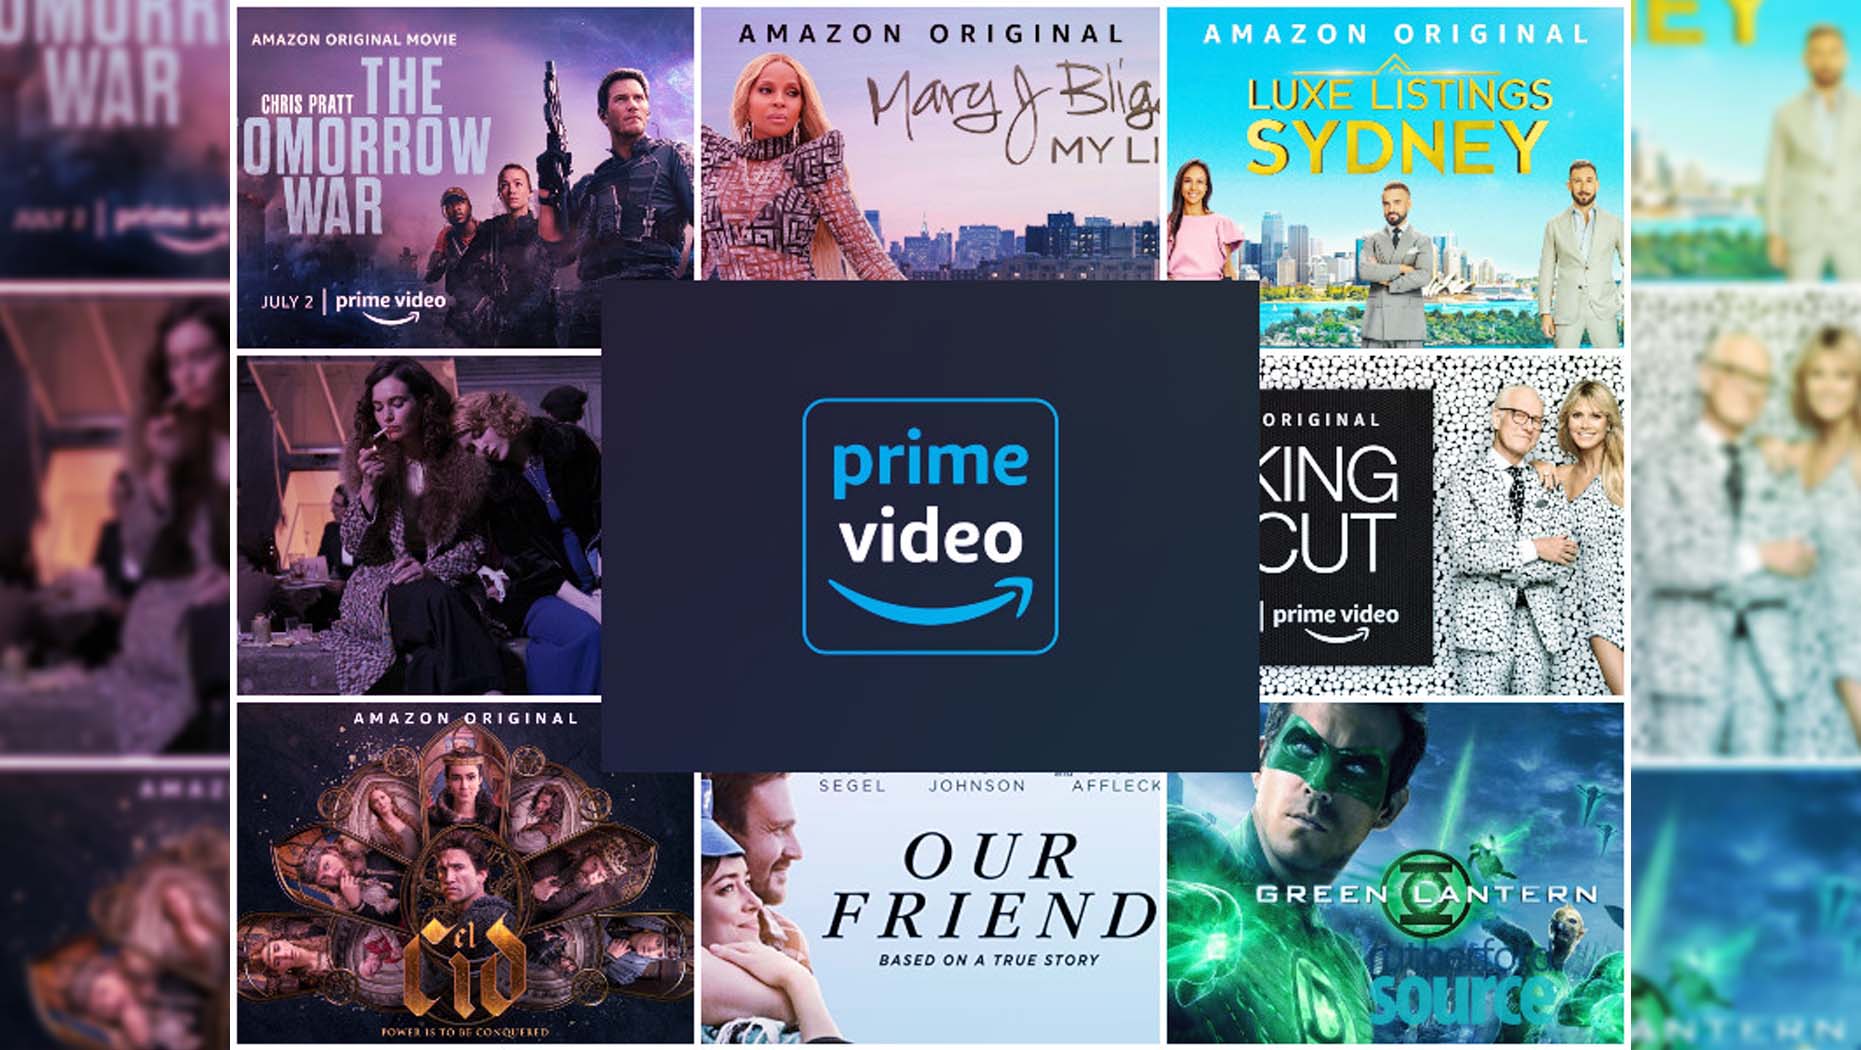 Movie and Shows On Amazon Prime Video in July 2021 Daily